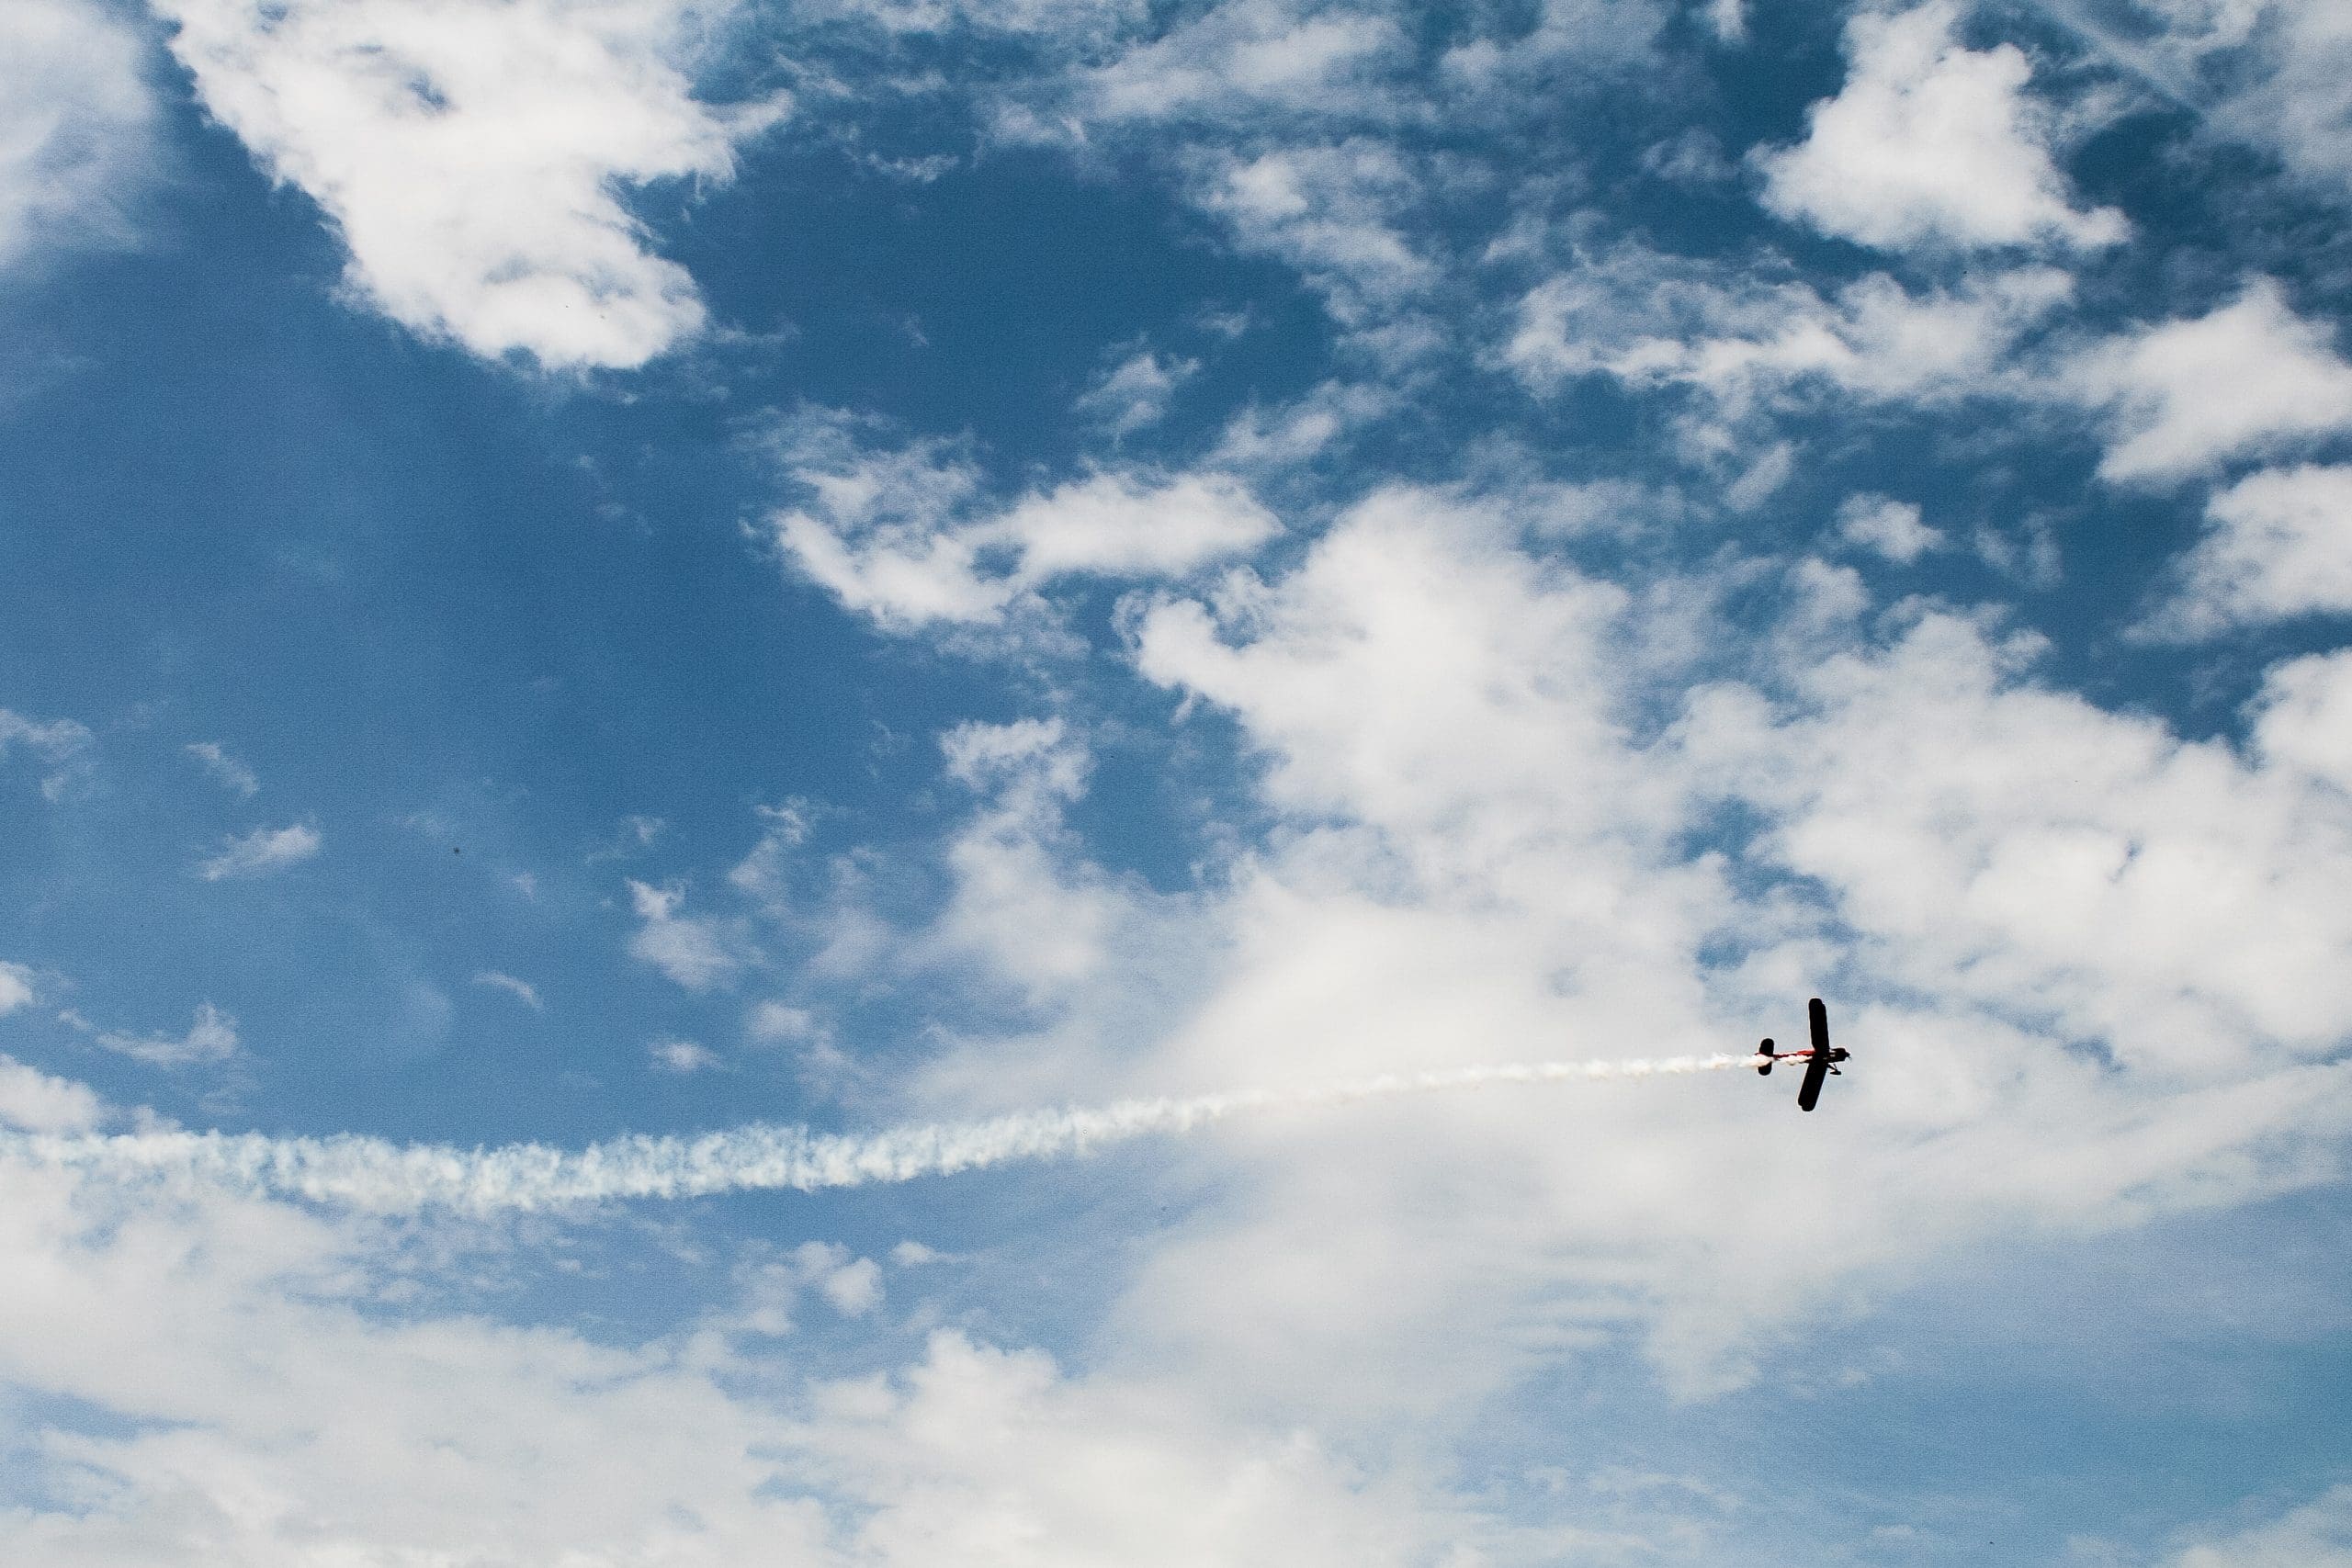 biplane in a blue sky with clouds